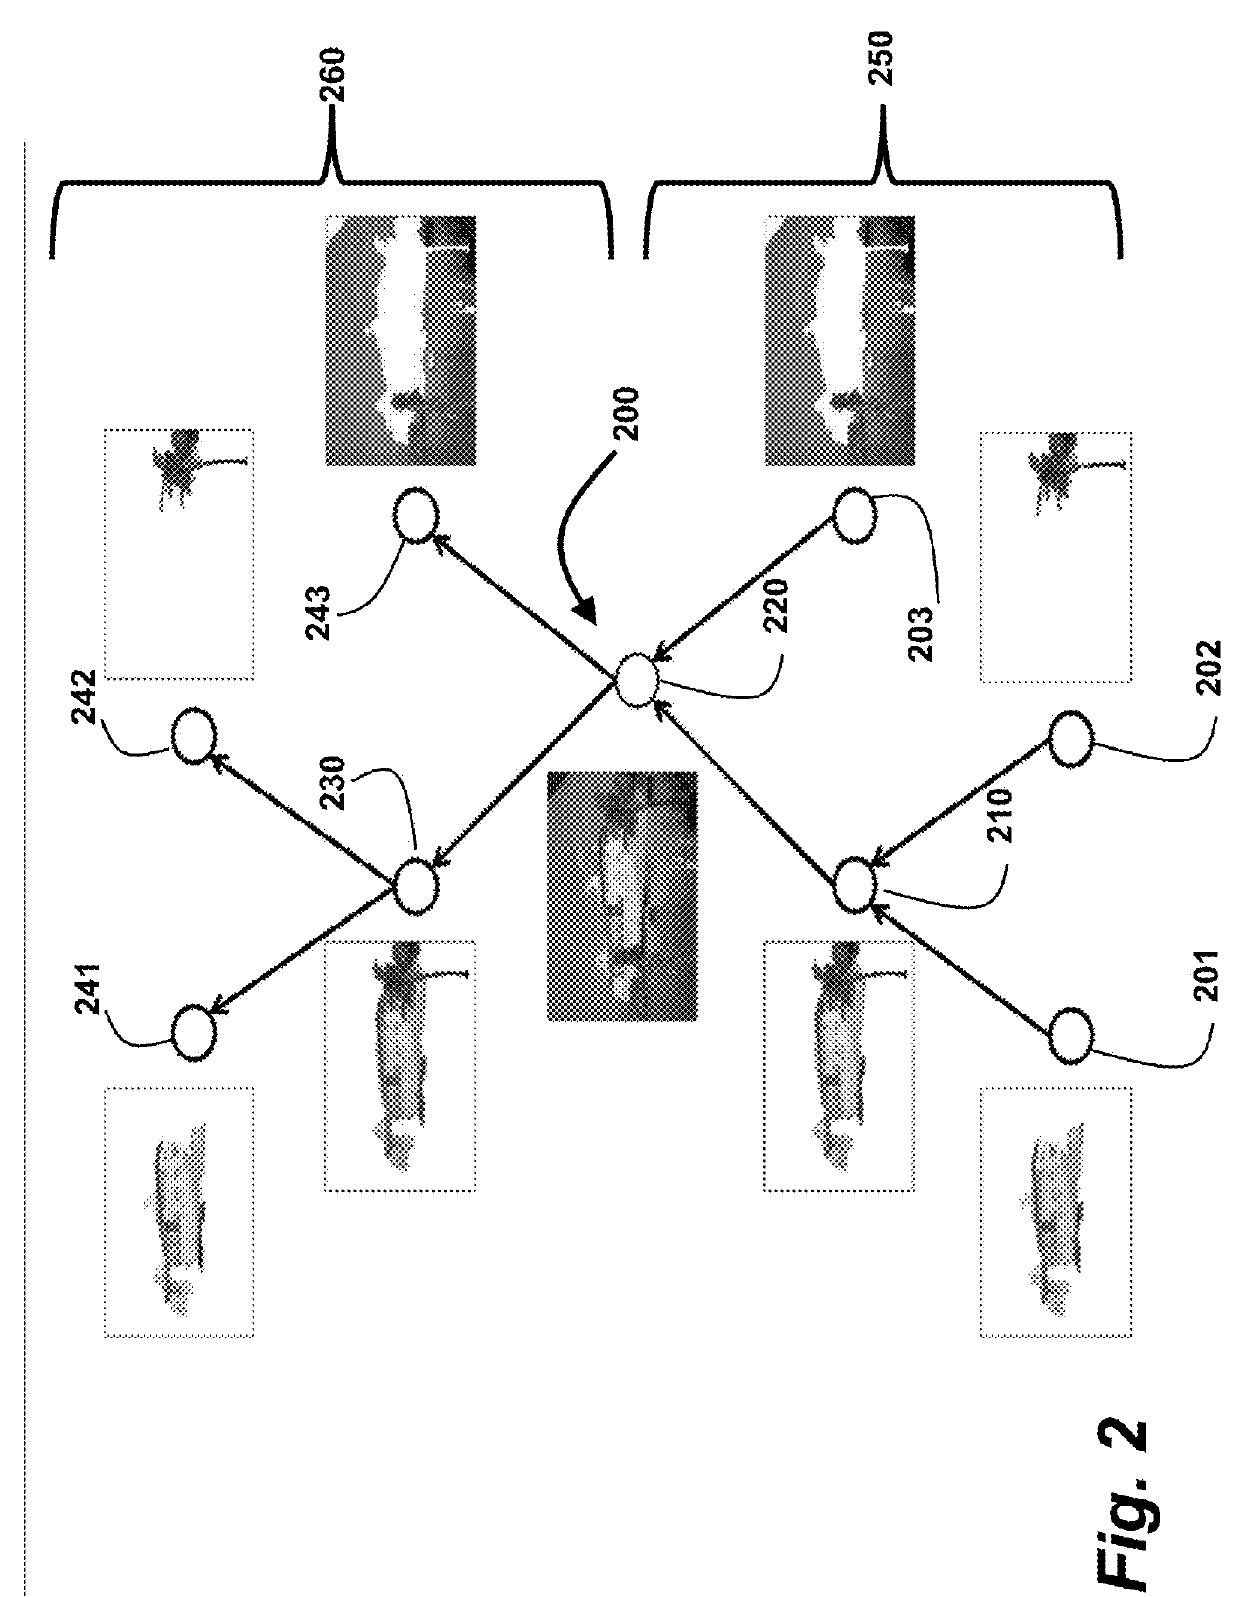 Method for Semantically Labeling an Image of a Scene using Recursive Context Propagation